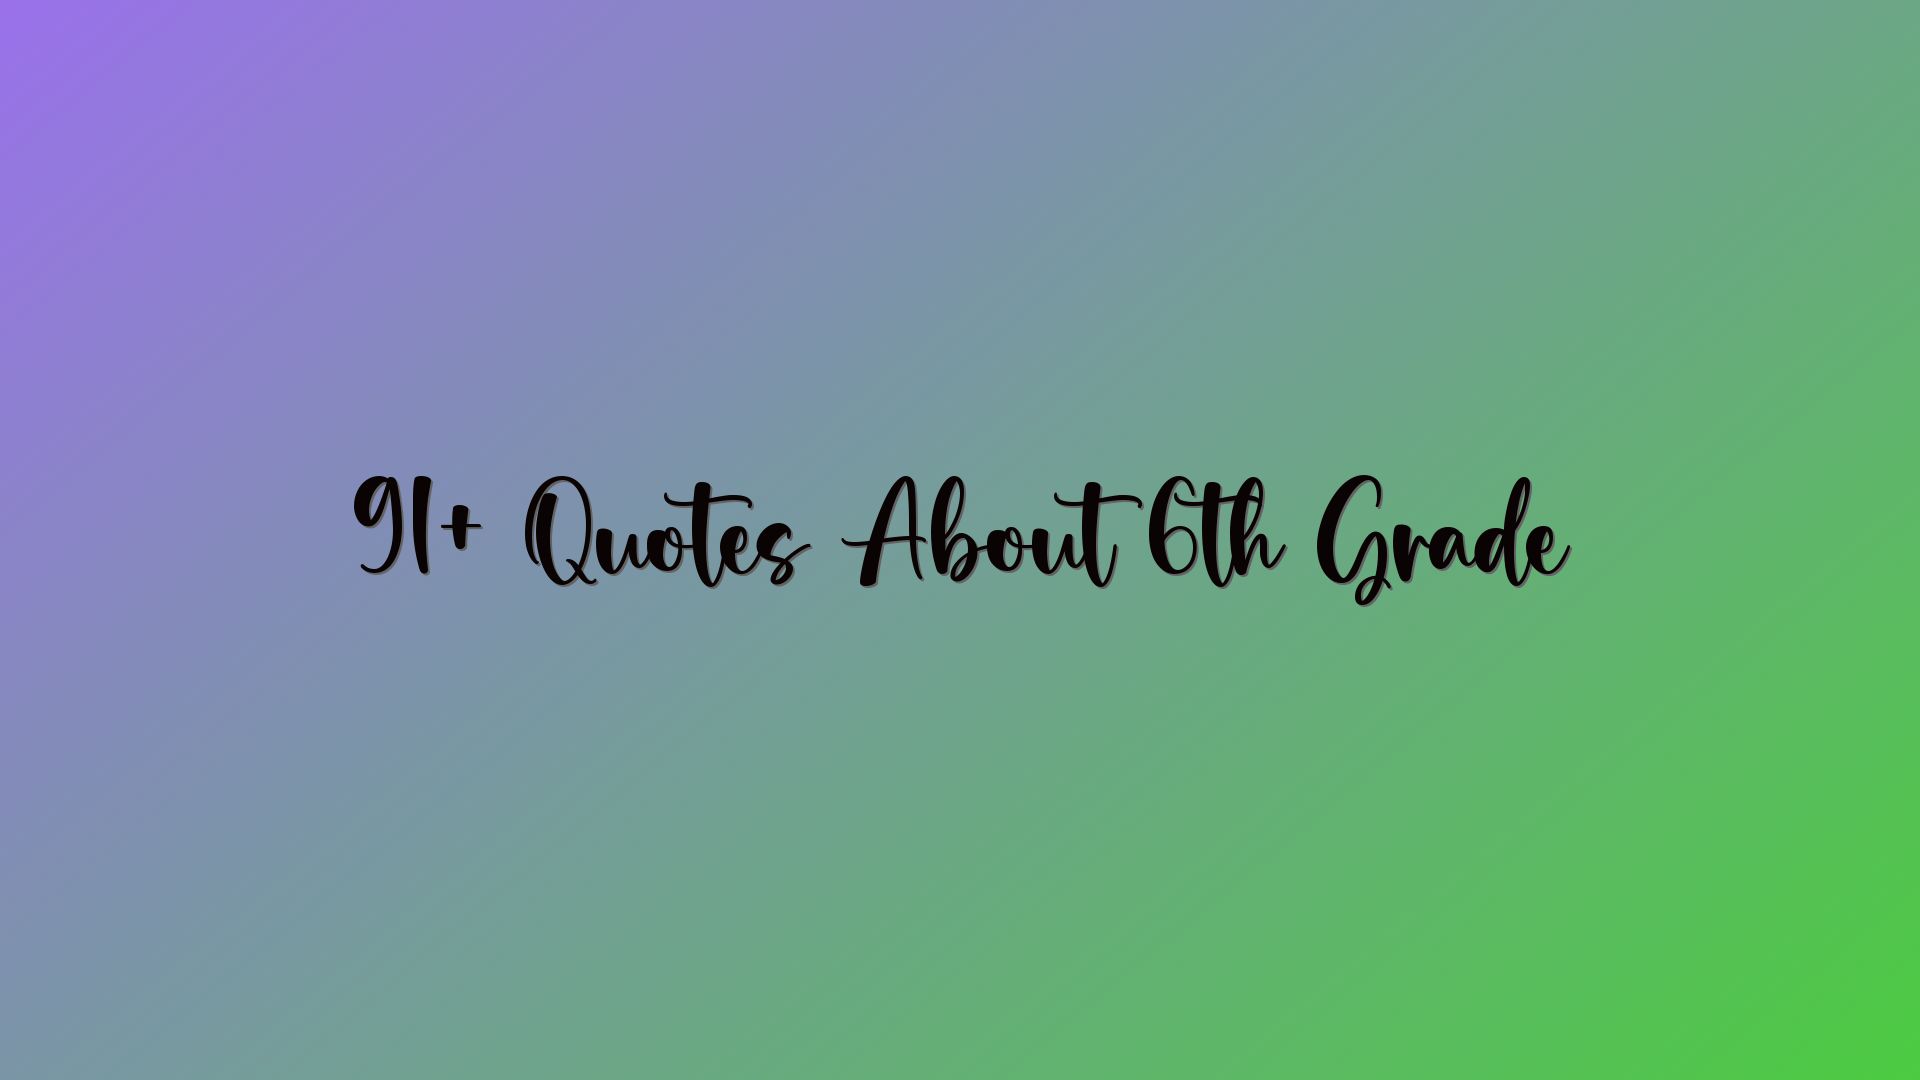 91+ Quotes About 6th Grade